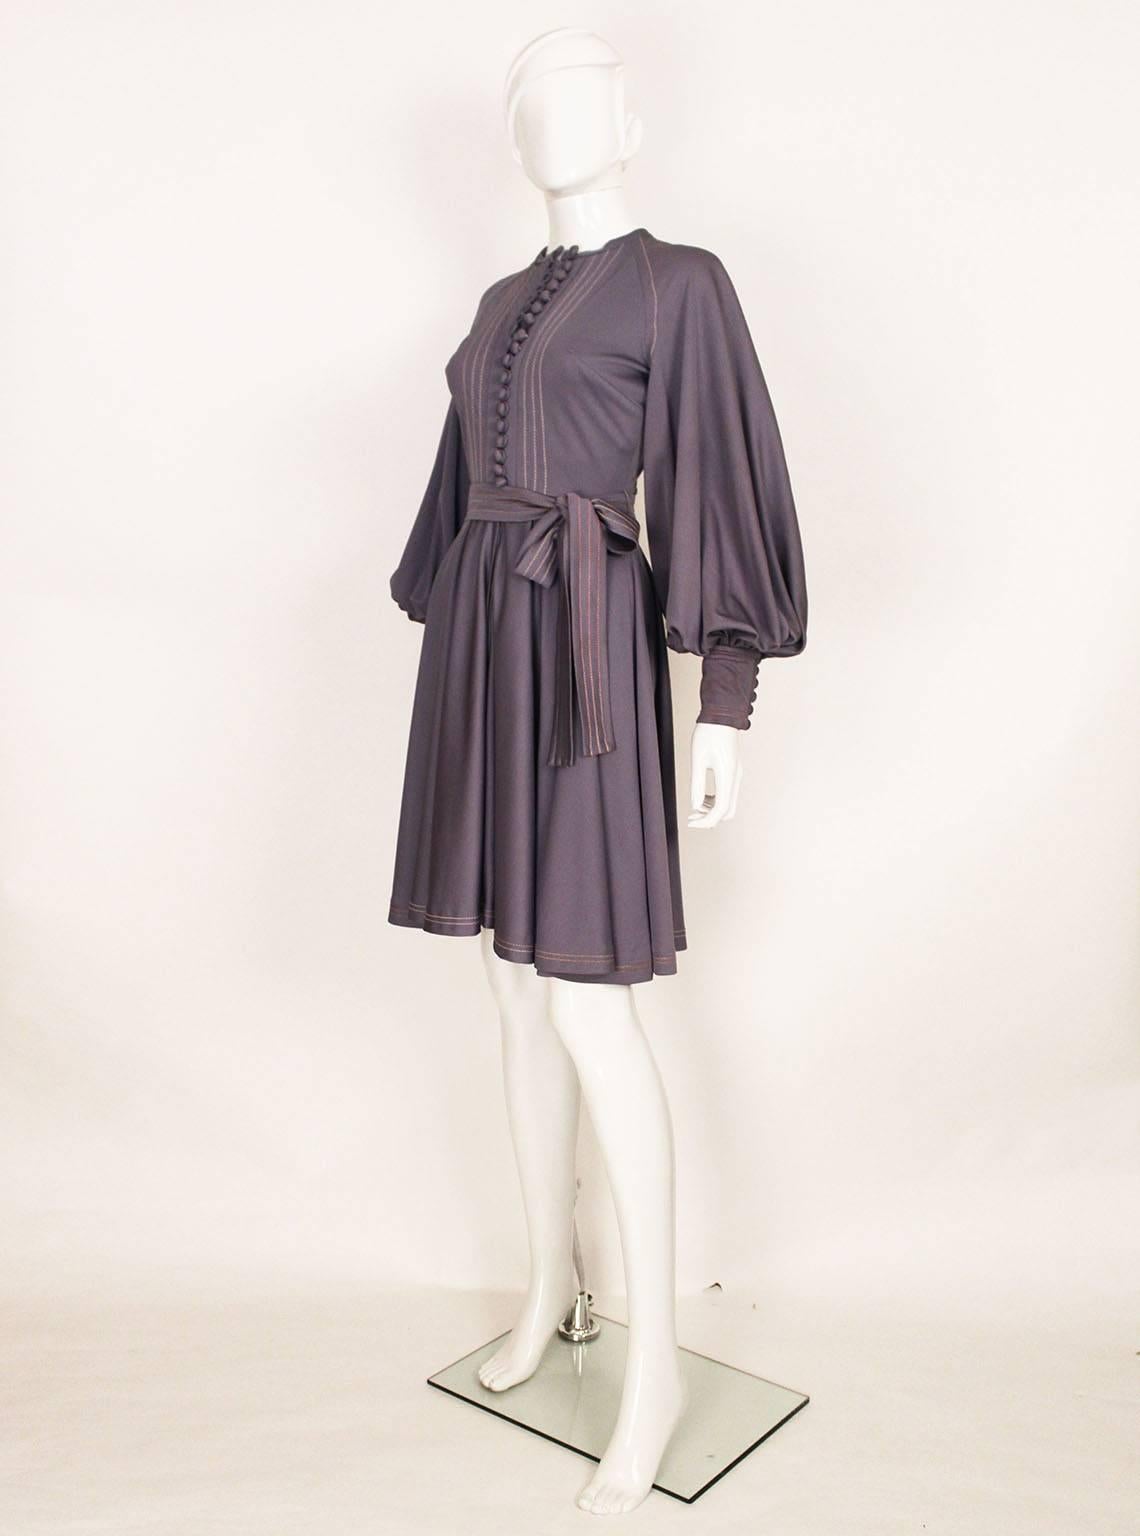 A charming and chic dress by British designer Jean Varon.  This dress is made of jersey, and is in a lovely light lavender colour . The dress has a button front down to the waist and a short zip from the waist down.The skirt is full and the  wide